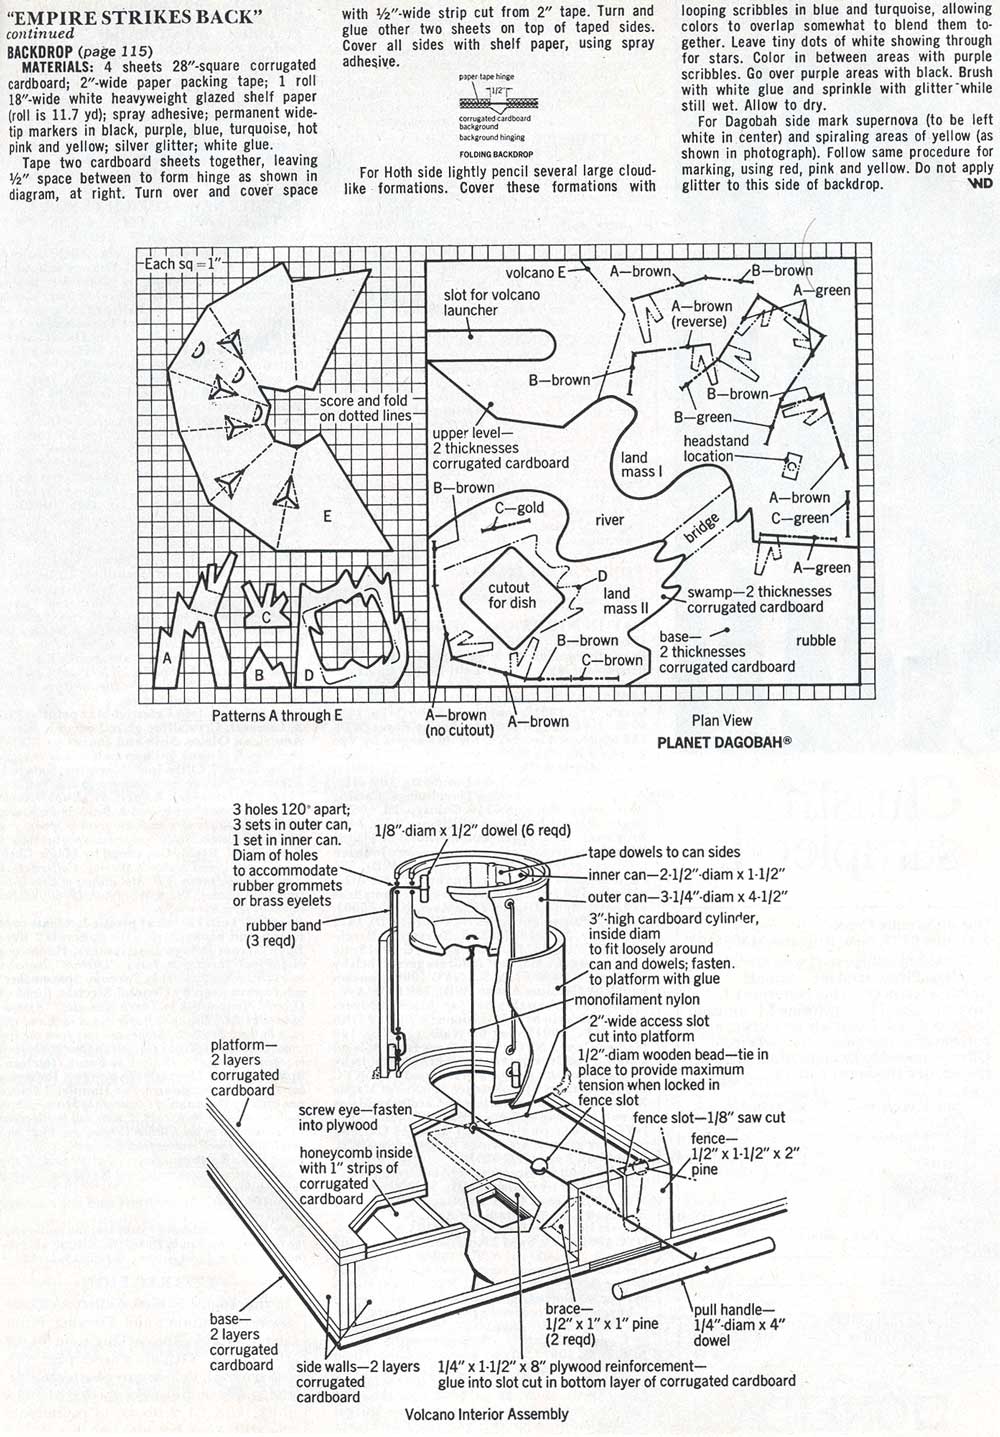 The third (and final) part of the instructions on how to build the Dagobah Playset from Woman's Day